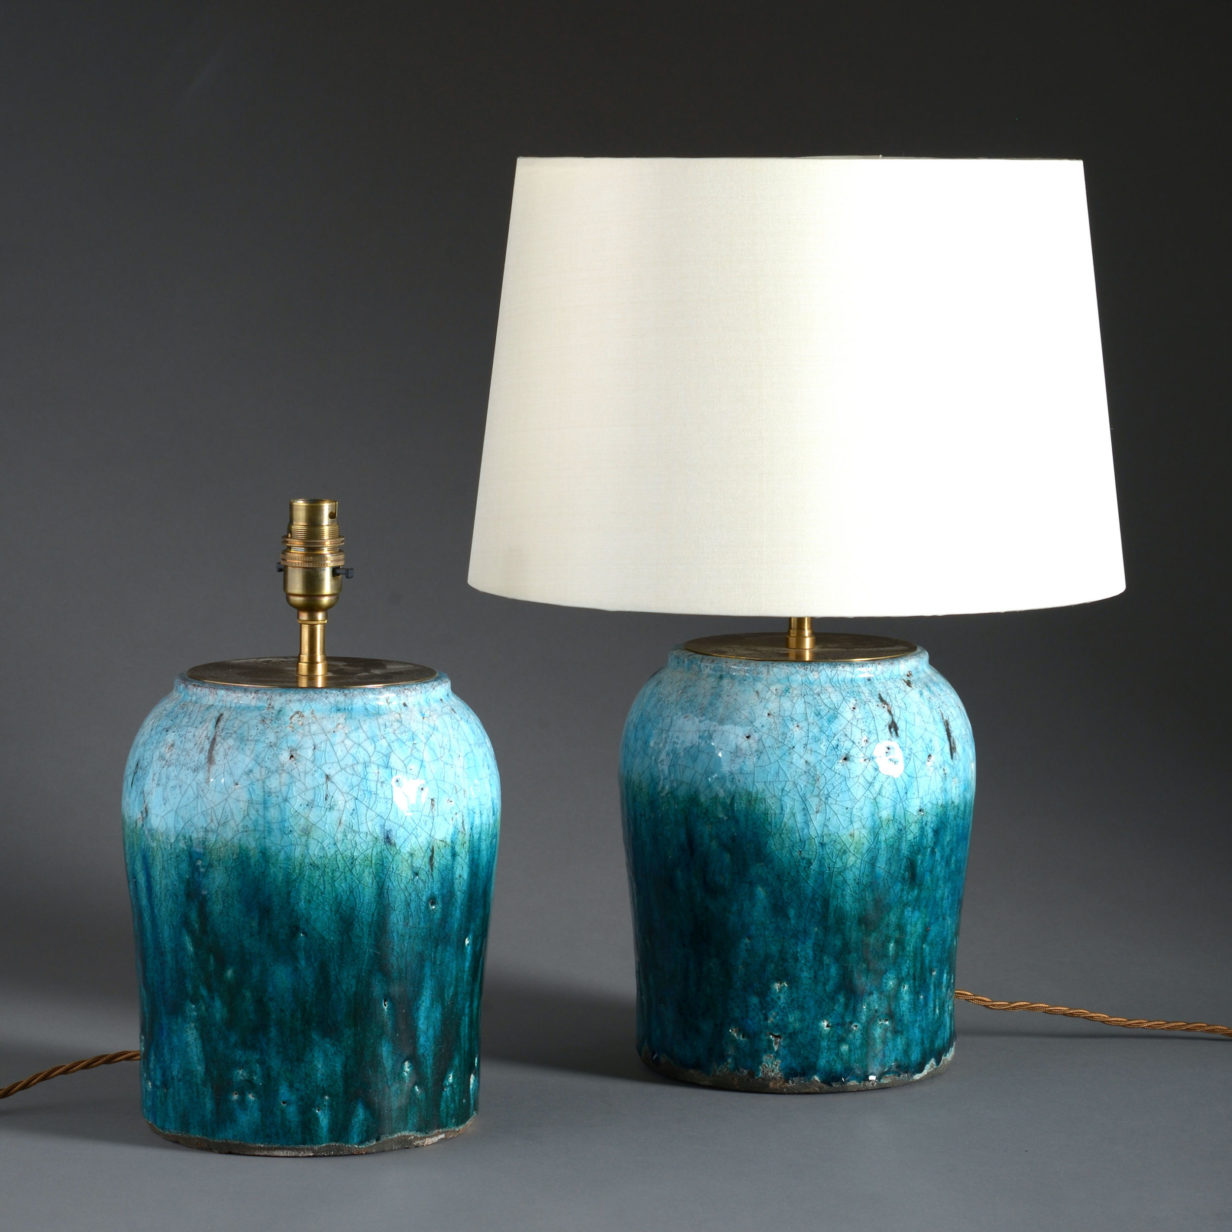 A pair of turquoise crackle glaze pottery vases as lamps